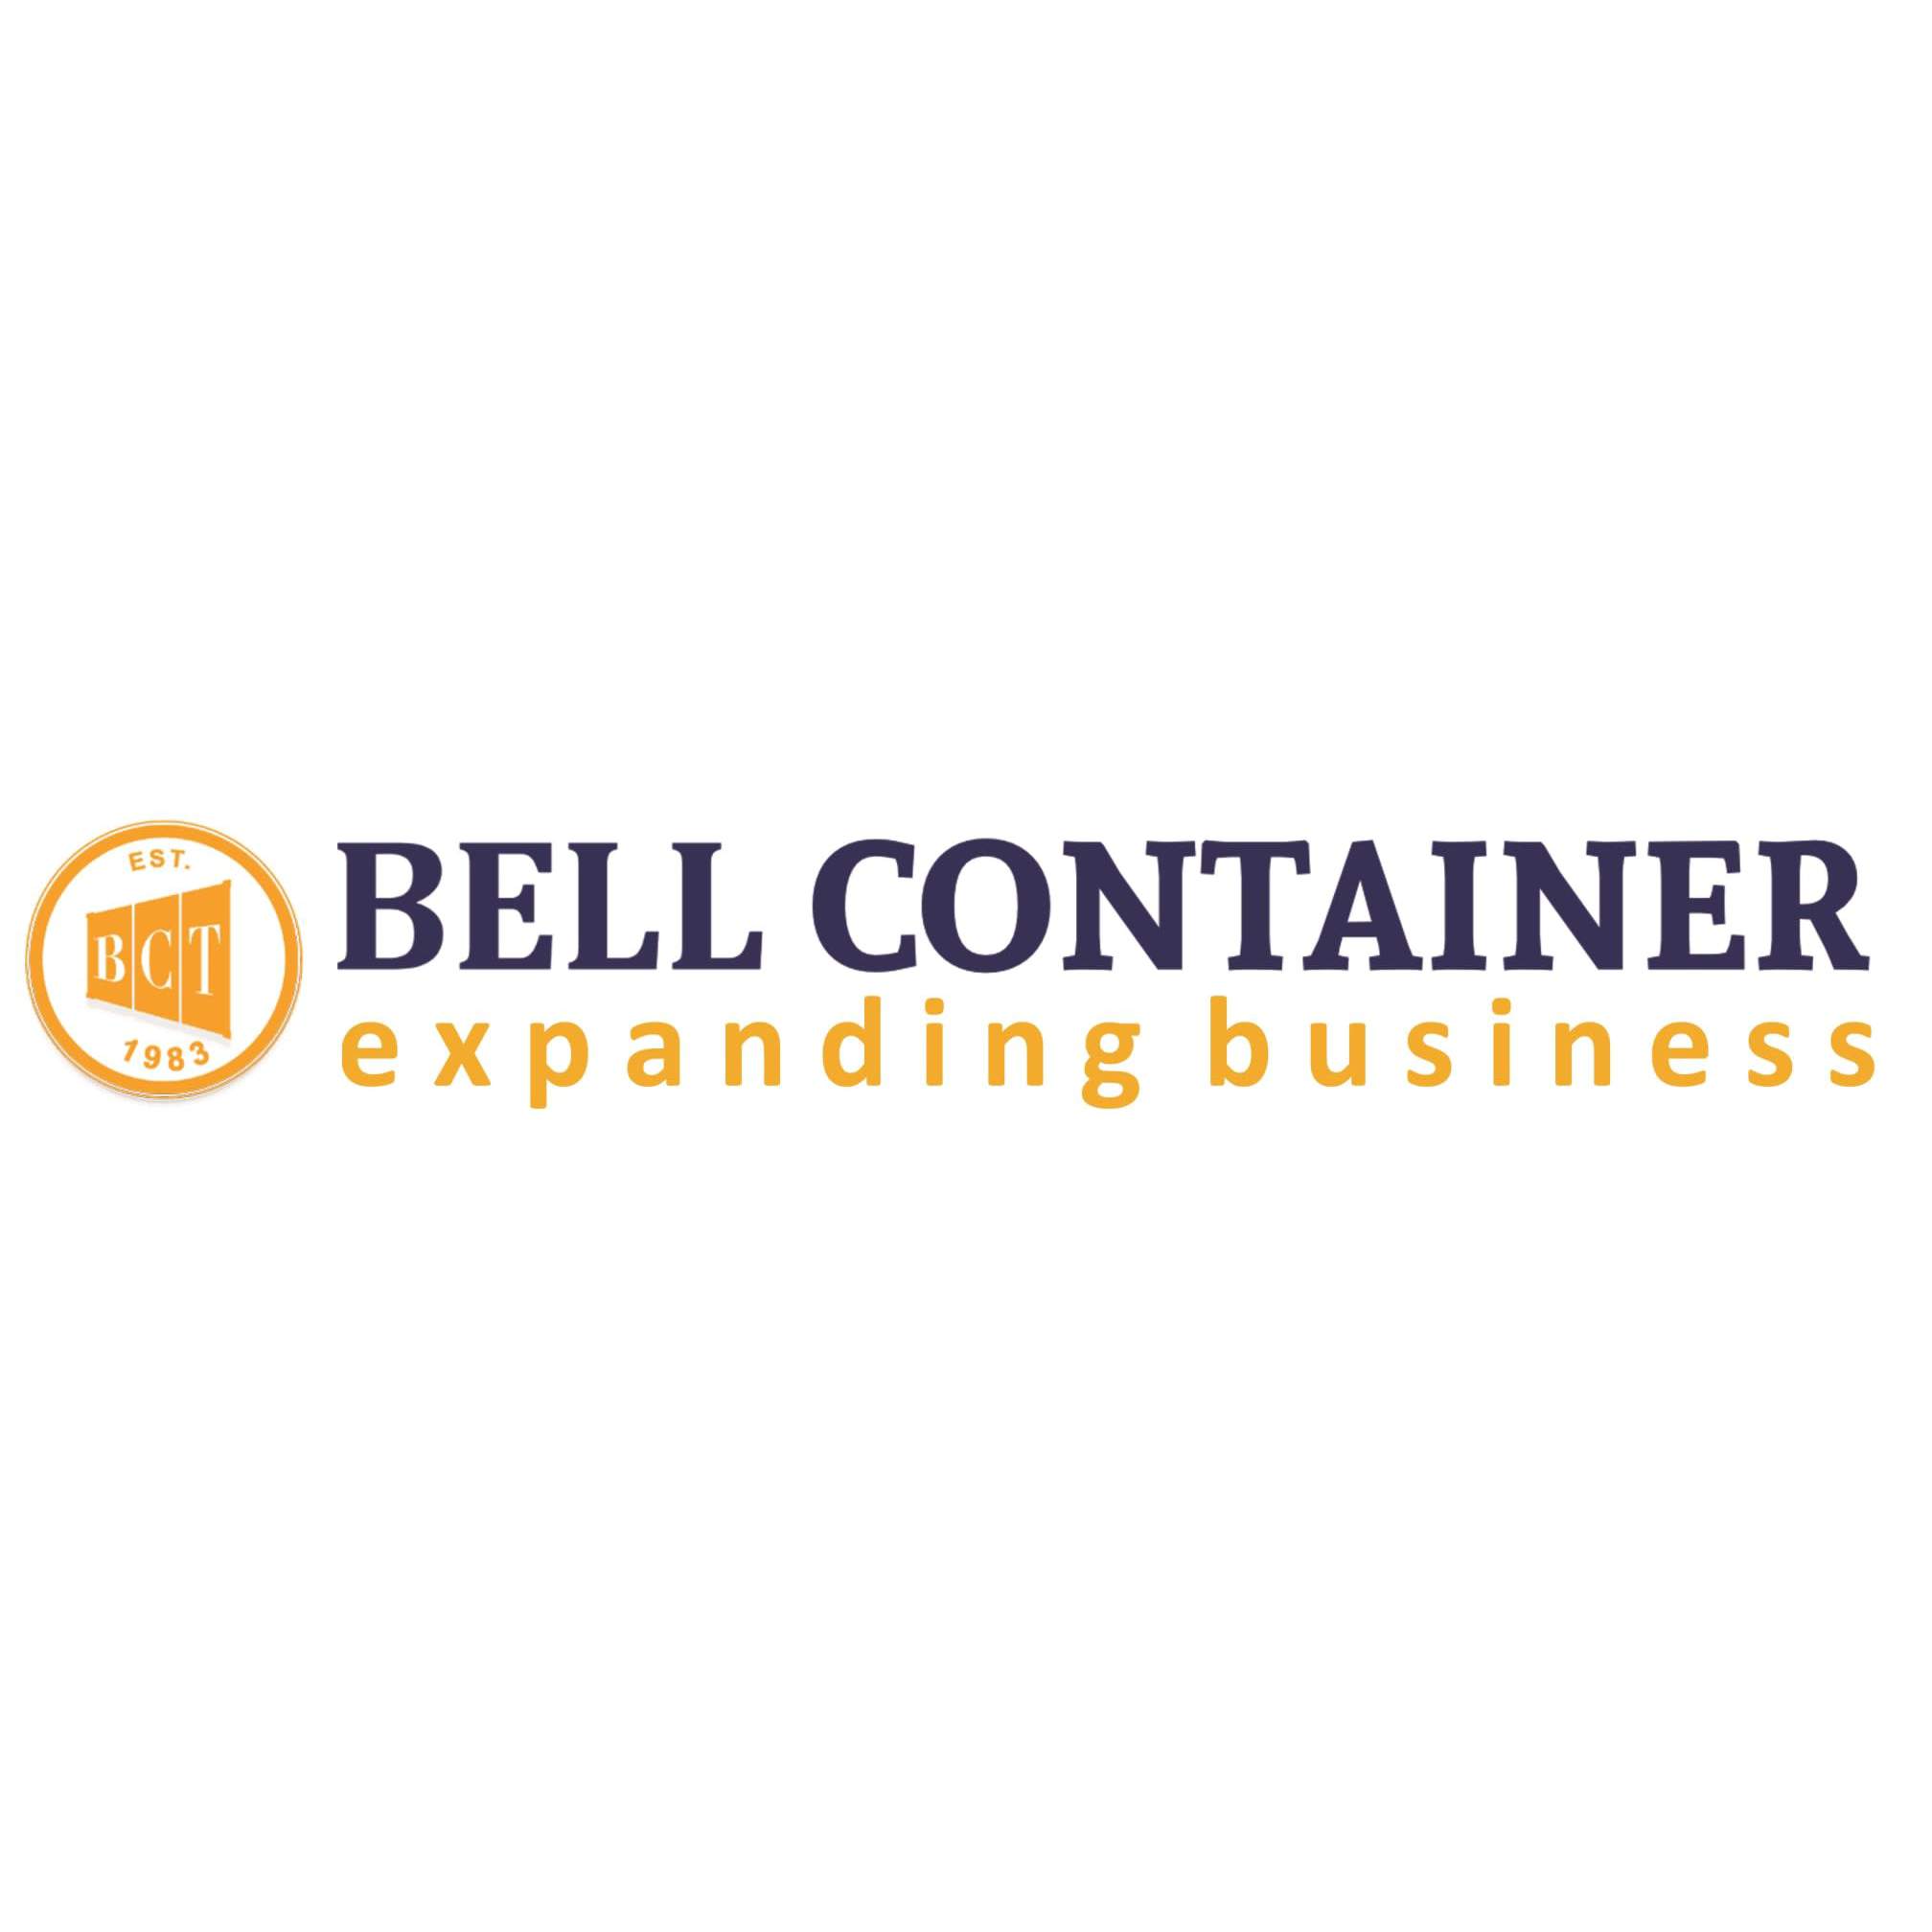 LOGO Bell Container Trading Ltd Potters Bar 01707 648400